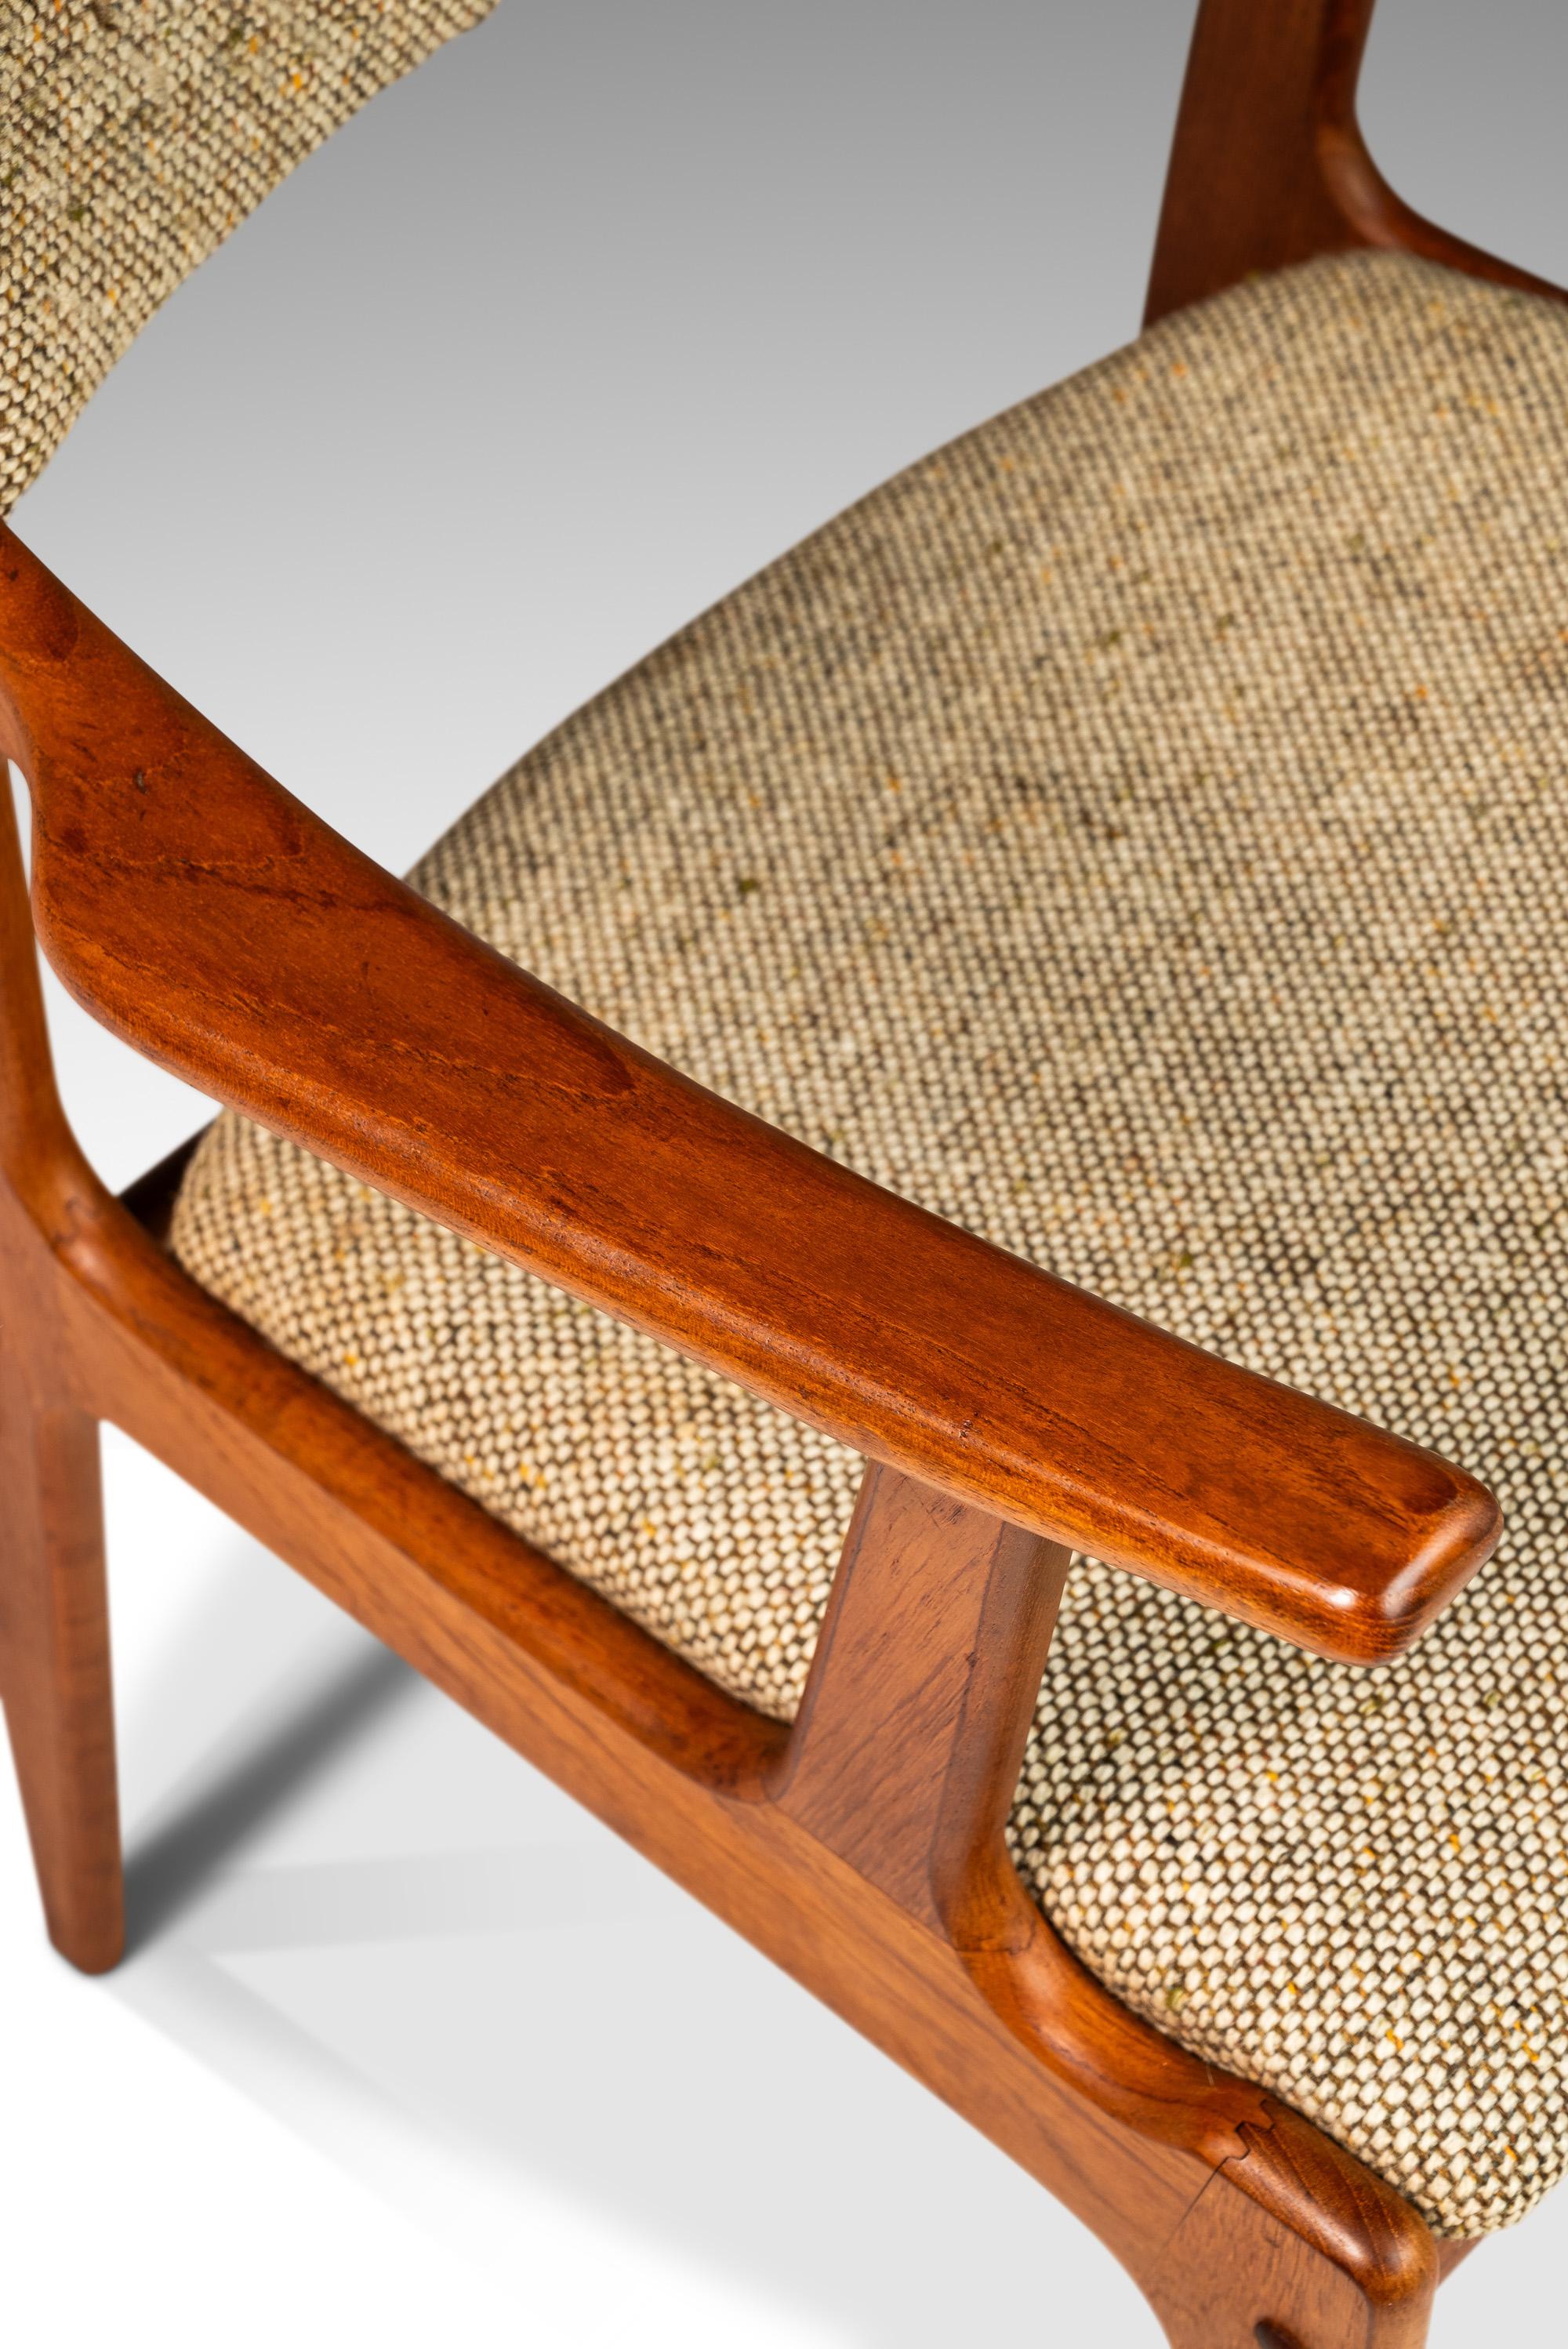 Danish Mid-Century Arm Chair in Solid Teak & Original Fabric by D-Scan, c. 1970s For Sale 1